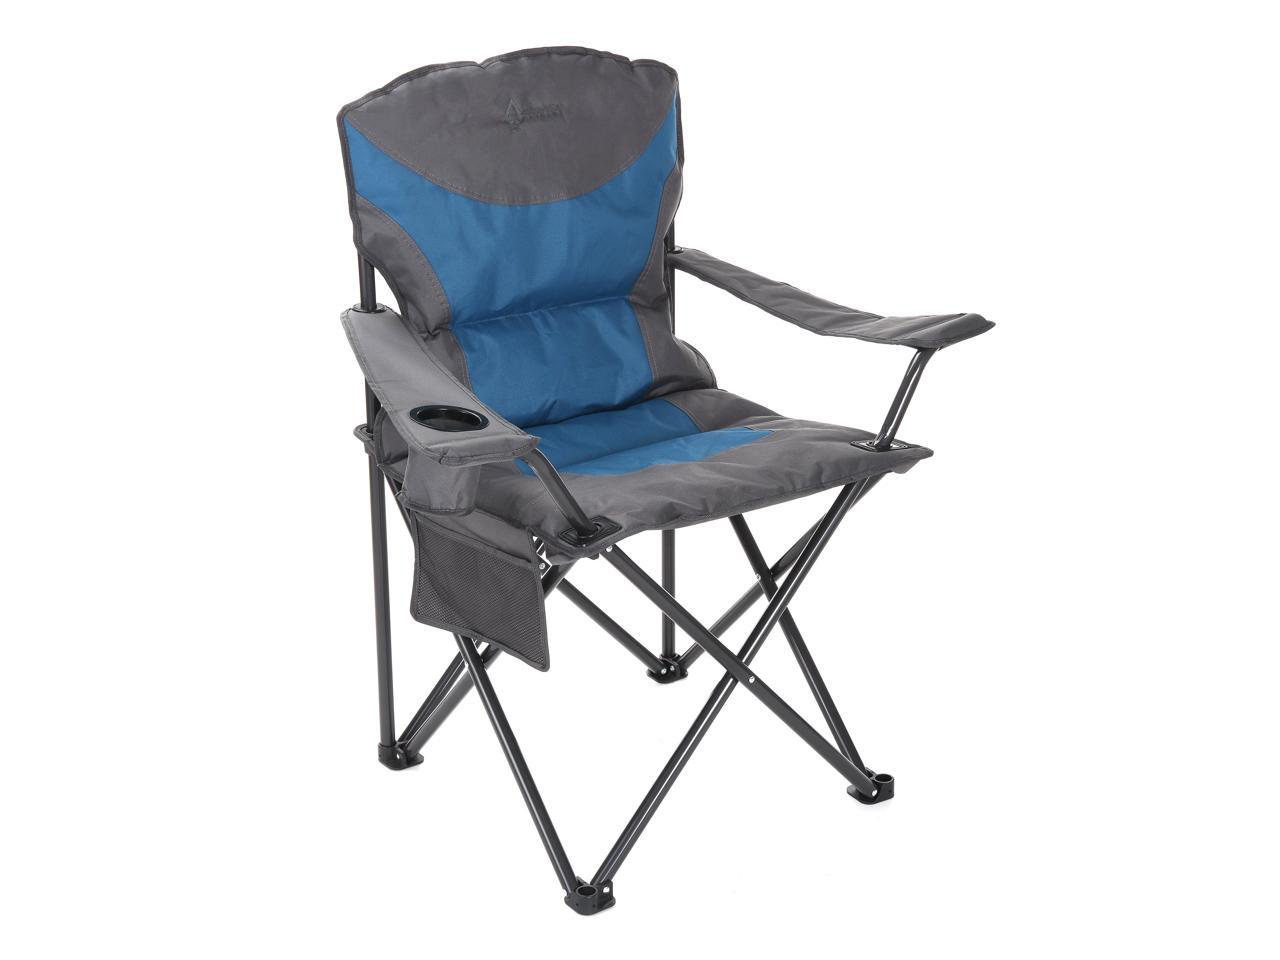 ARROWHEAD OUTDOOR Portable Folding Camping Quad Chair w/ Added 